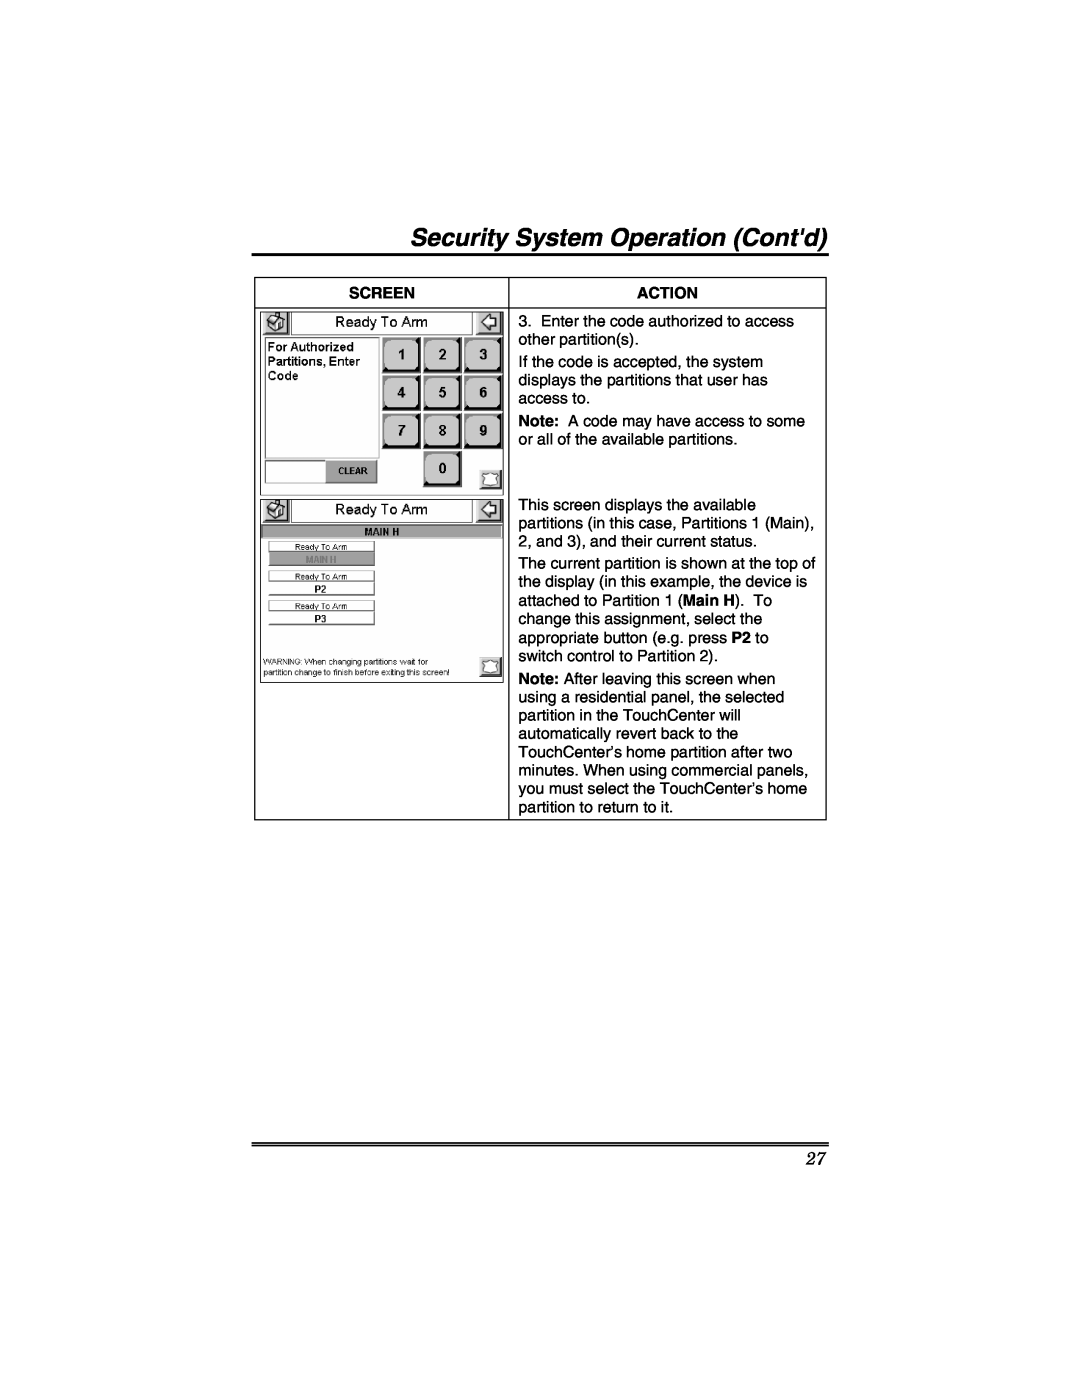 Honeywell 6271V Security System Operation Contd, Screen, Action, Enter the code authorized to access other partitions 